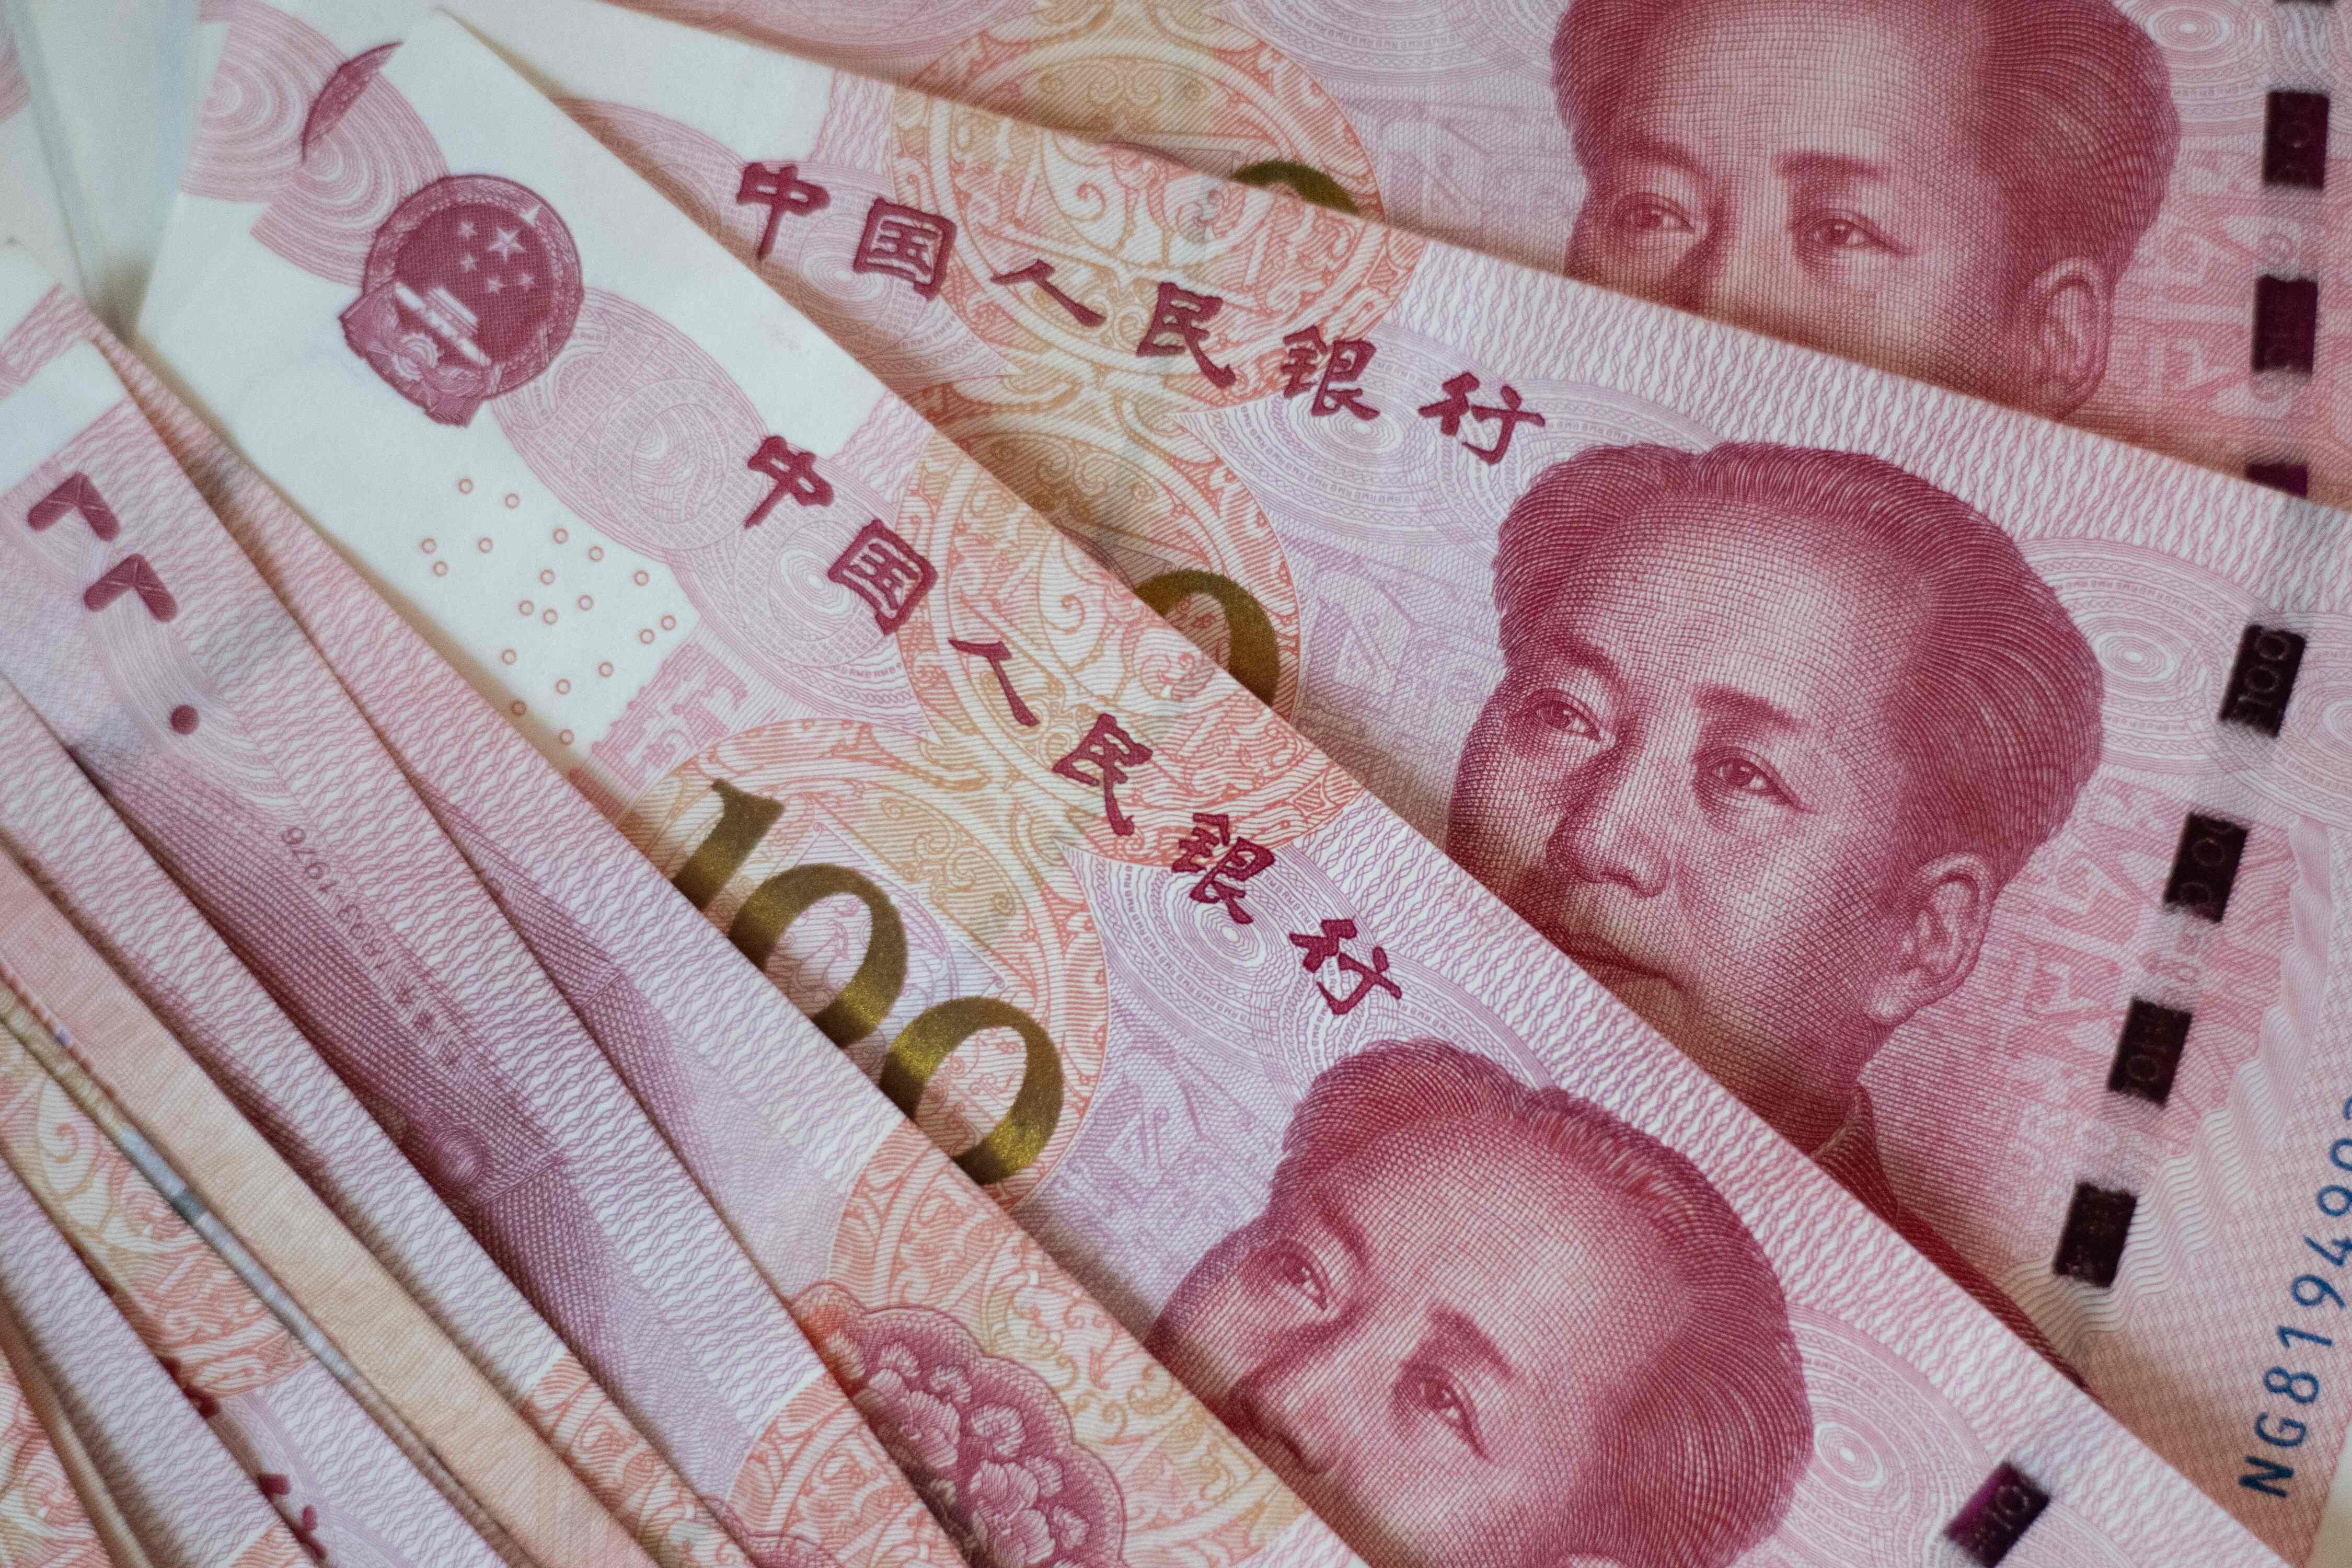 Generally the Chinese yuan acts as an important anchor in the regional foreign exchange market. Photo: AFP